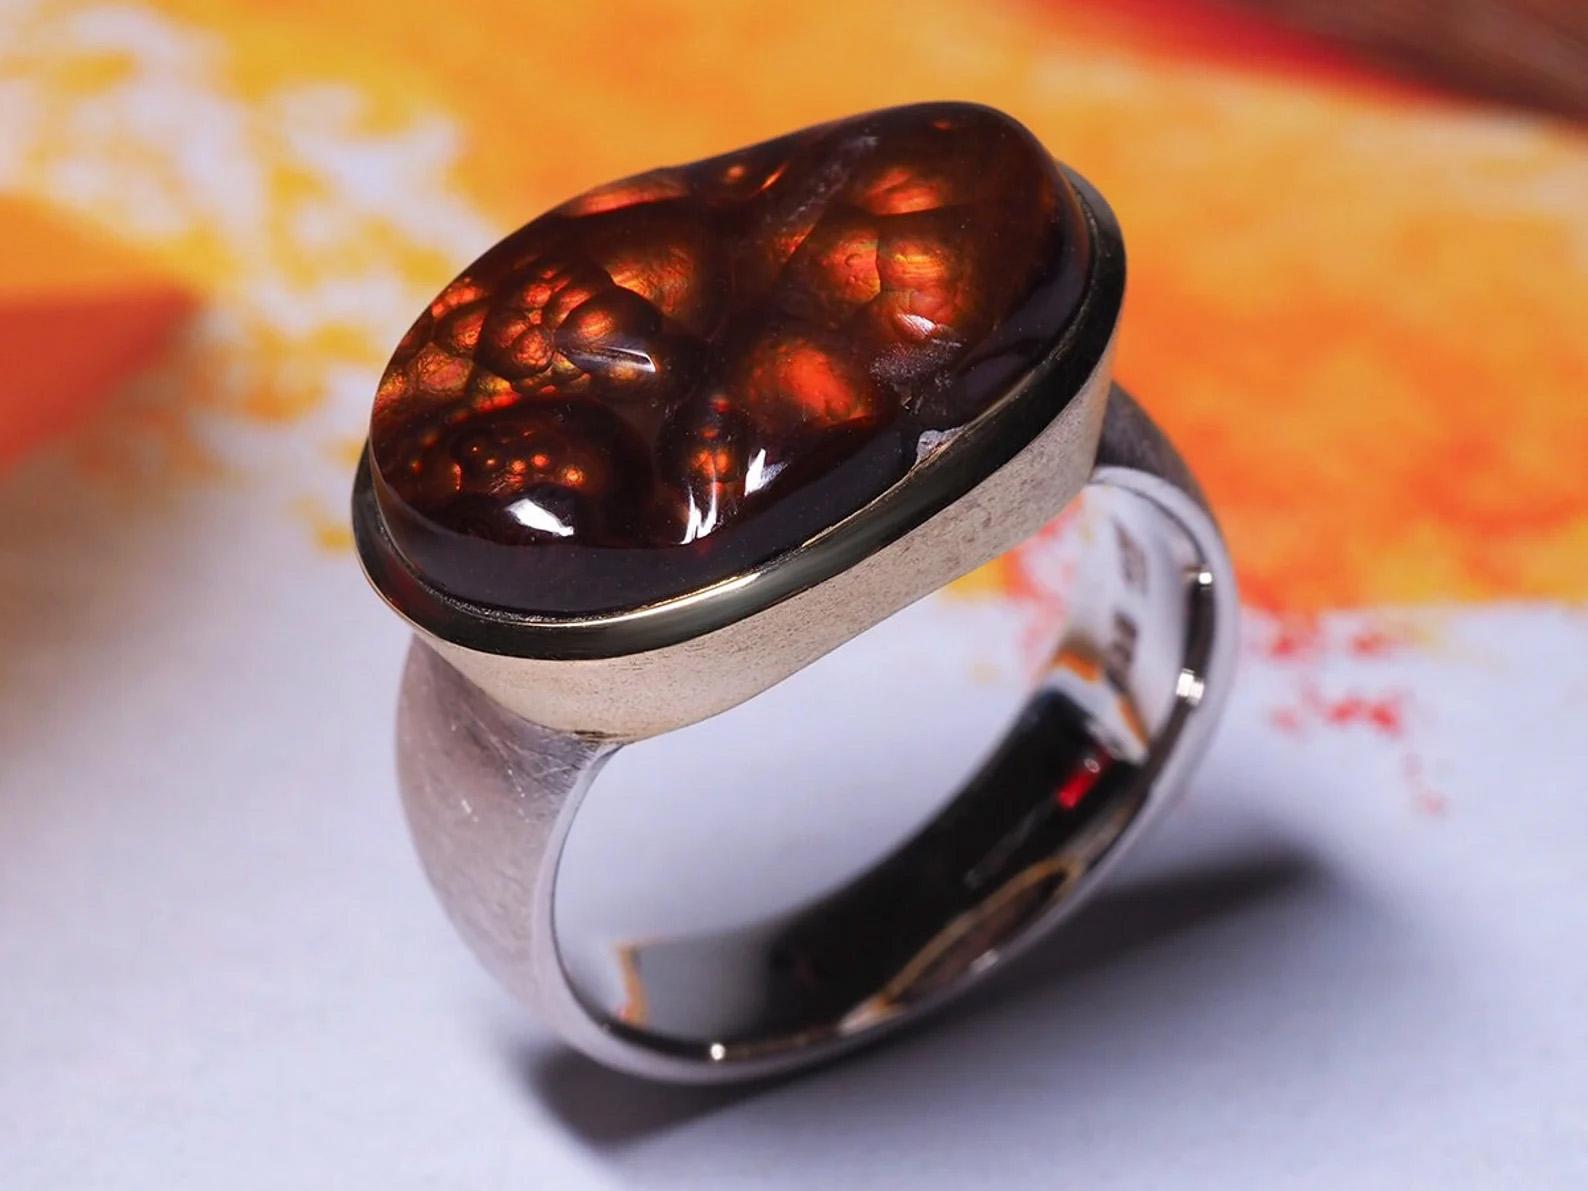 Natural Fire Agate ring in silver with gold plating
agate origin - Mexico
stone measurements - 0.51 х 0.75 in / 13 х 19 mm
ring weight - 10.43 grams
ring size - 8.75 US 